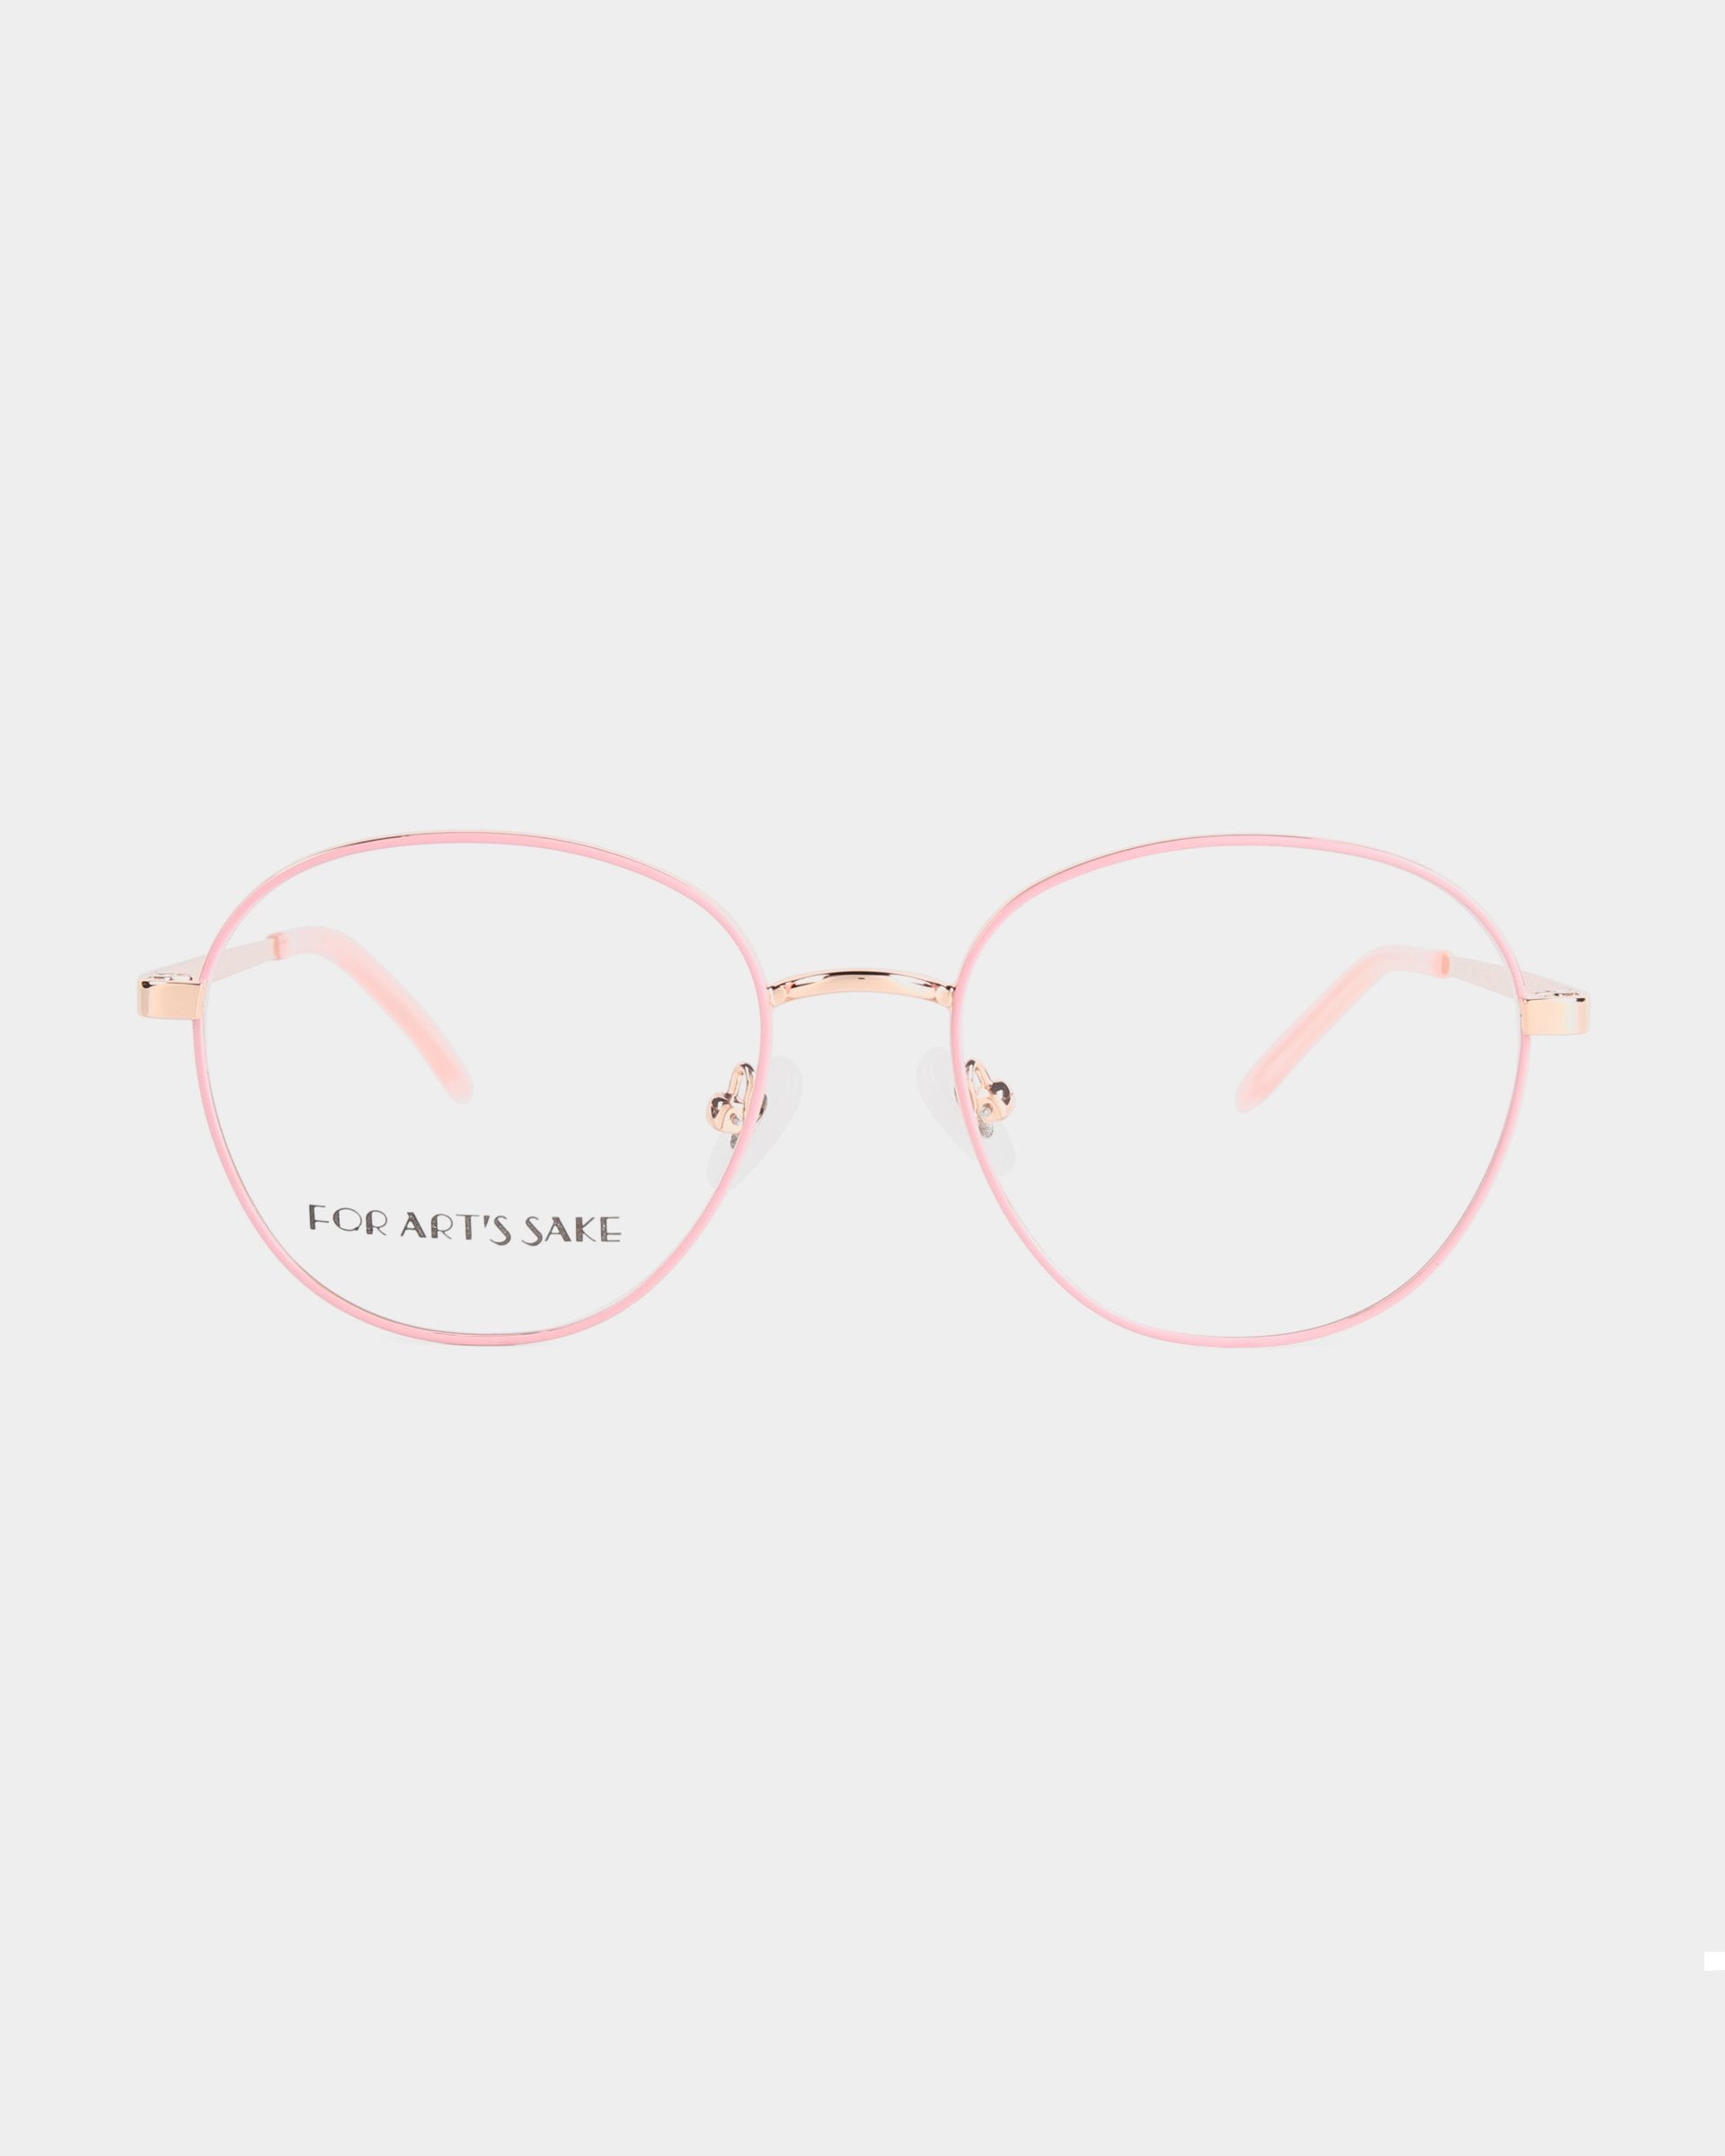 A pair of pink-rimmed eyeglasses with clear lenses on a white background. Featuring a metal frame, these glasses have a slight cat-eye shape and soft pink accents on the adjustable nose pads and temple tips. The left lens has the brand name &quot;For Art&#39;s Sake®&quot; visible. Introducing the Hailey by For Art&#39;s Sake®.